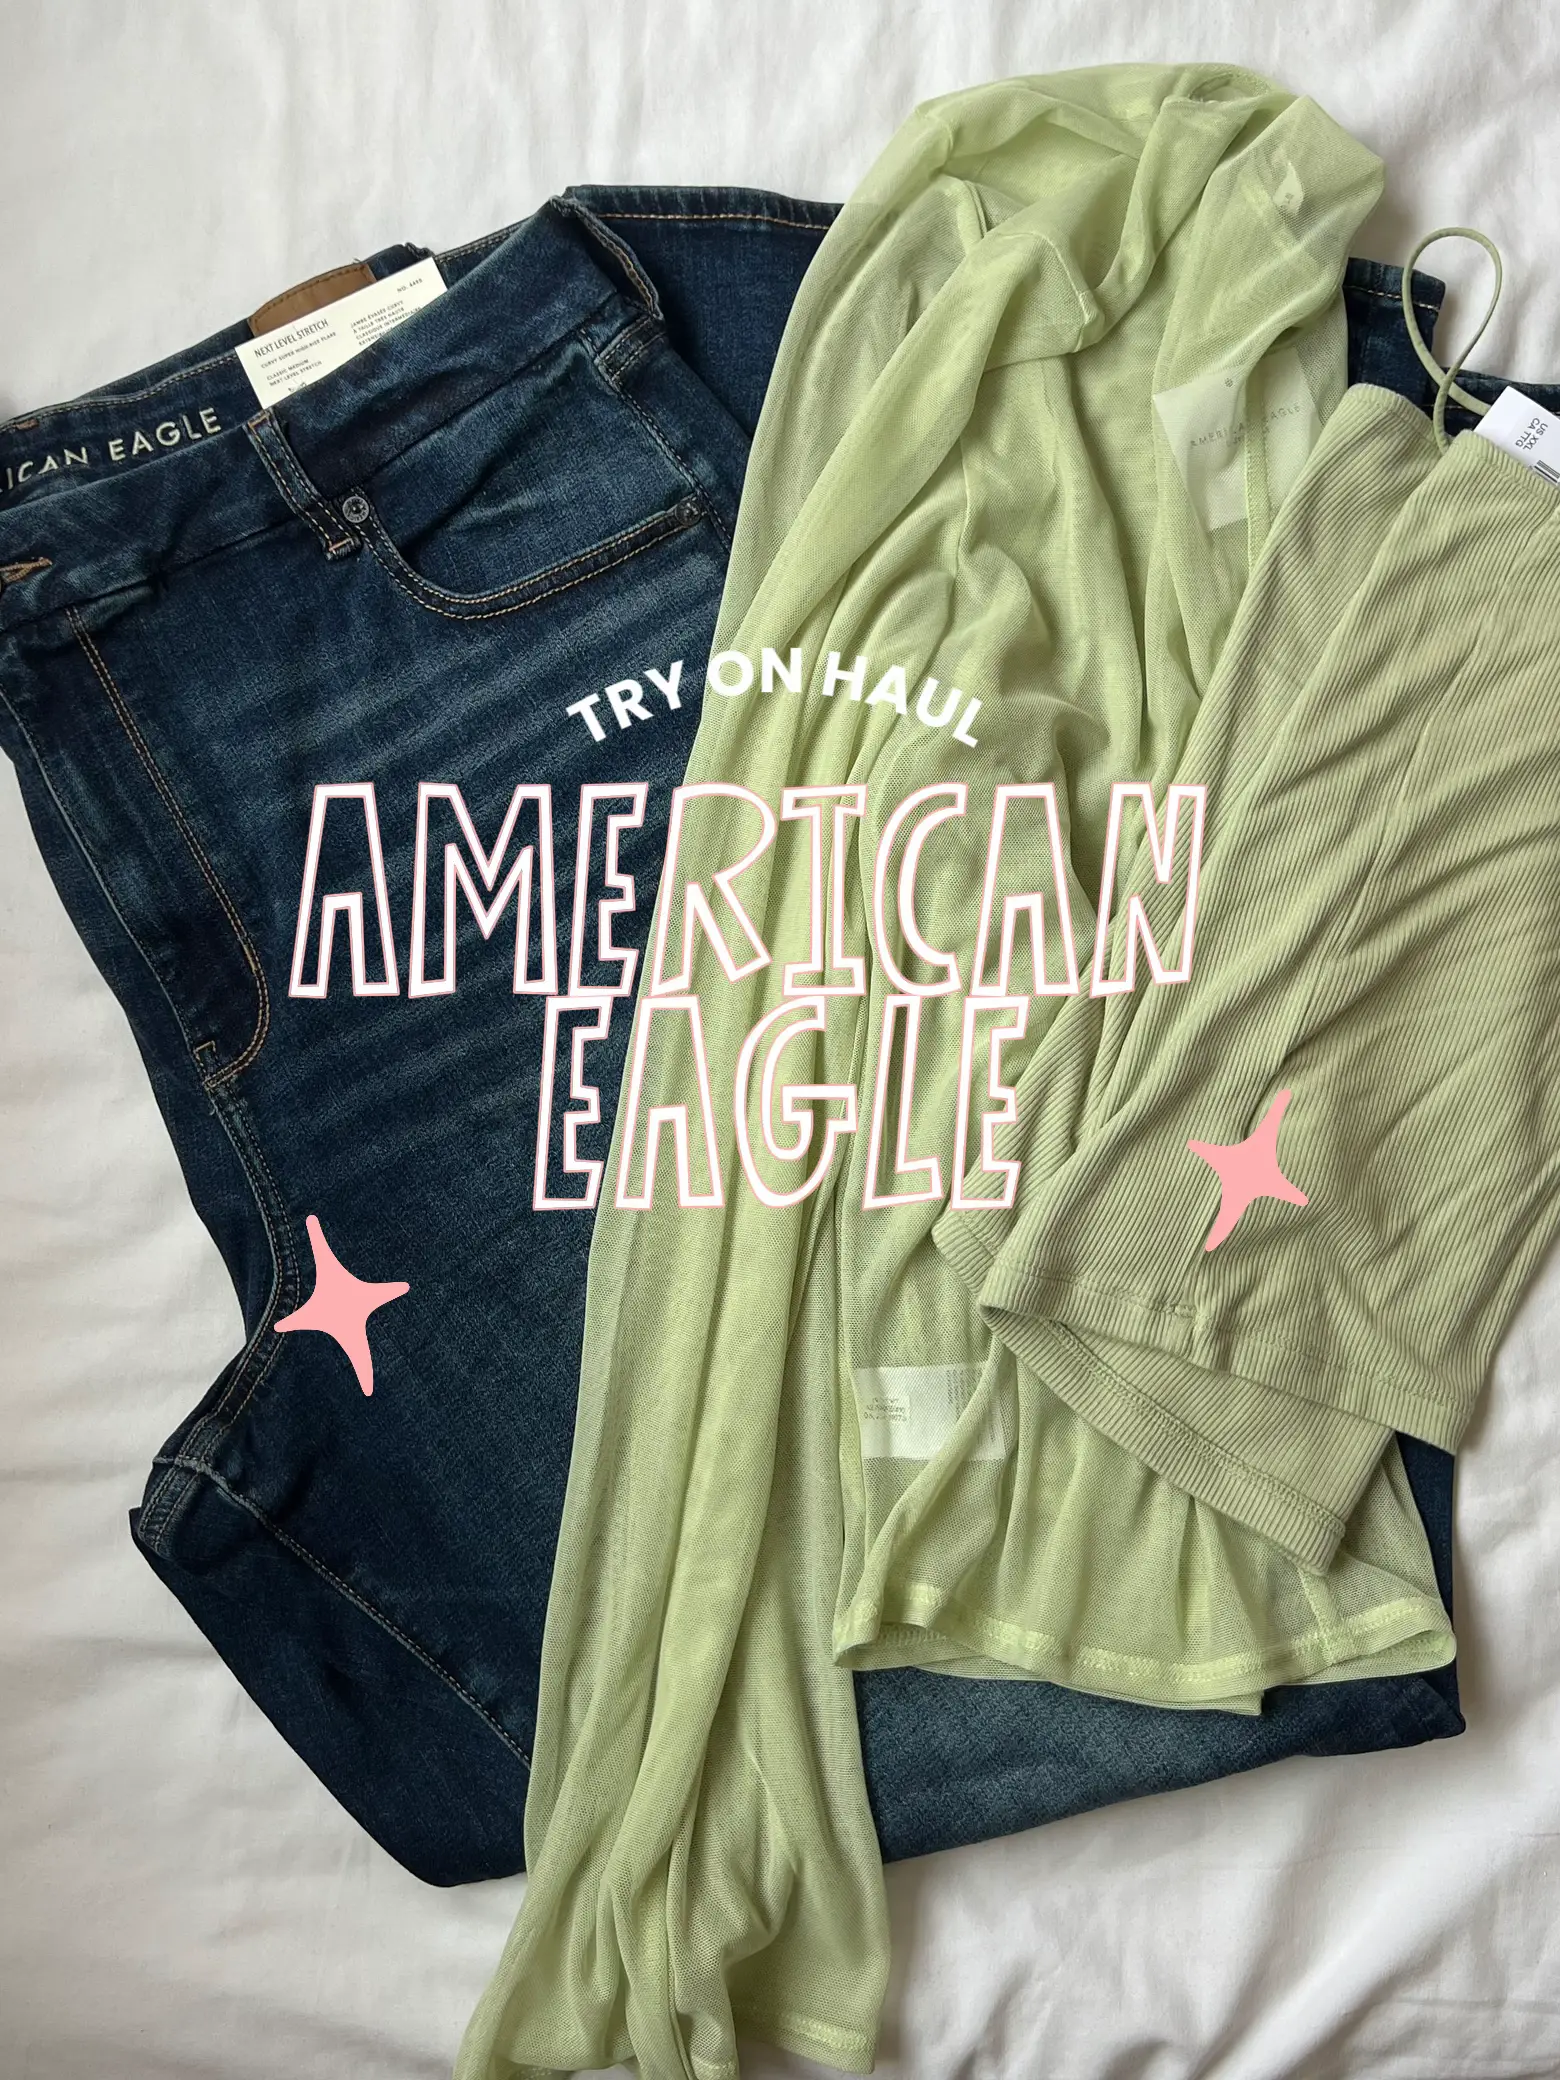 Elf Cosmetics and American Eagle Outfitters button up a denim